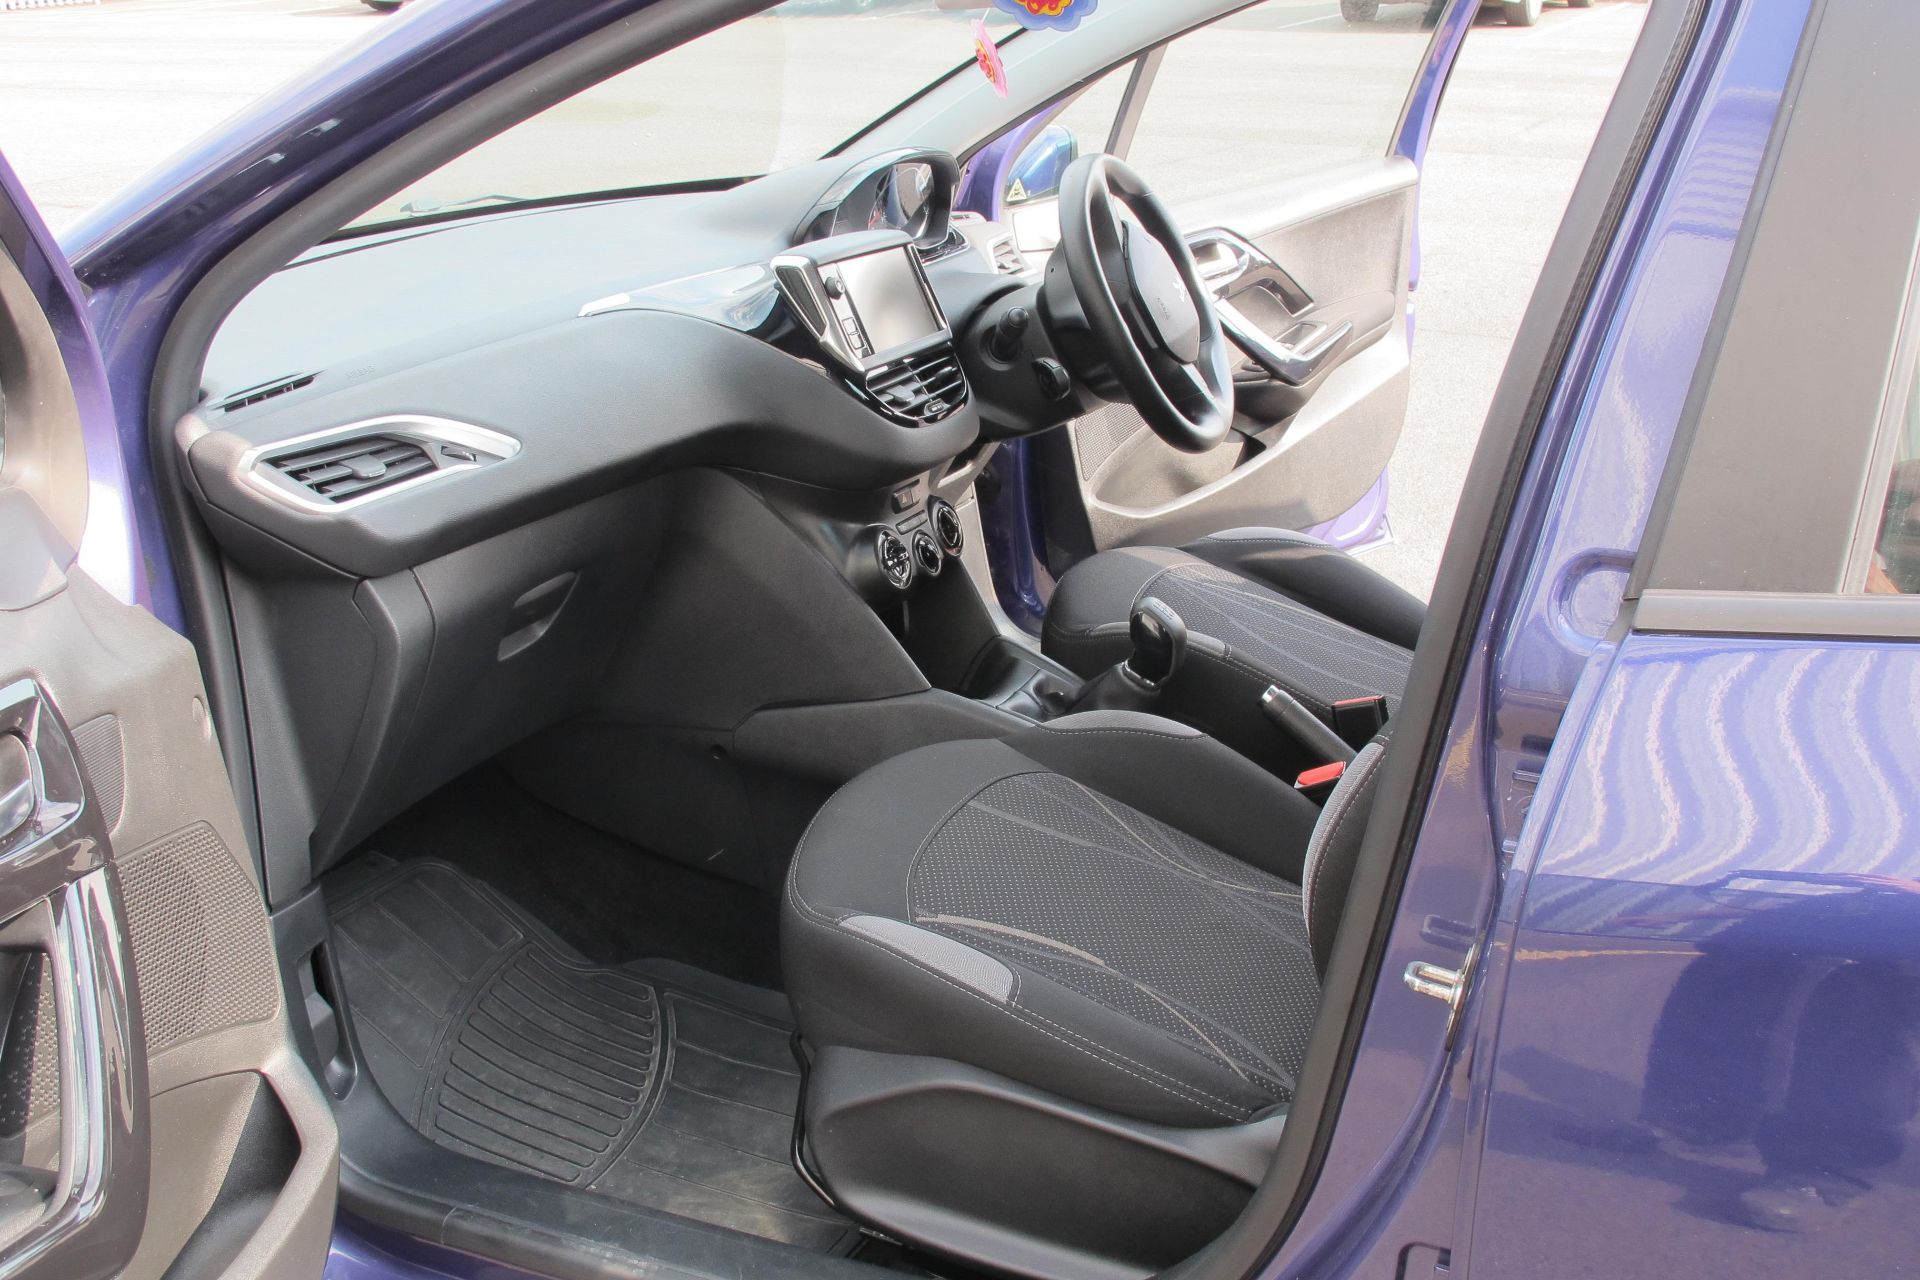 Peugeot 208 Active HDI 5 door hatch. 1398cc. Full service history, Registration FH14 EUN. Odometer - Image 13 of 18